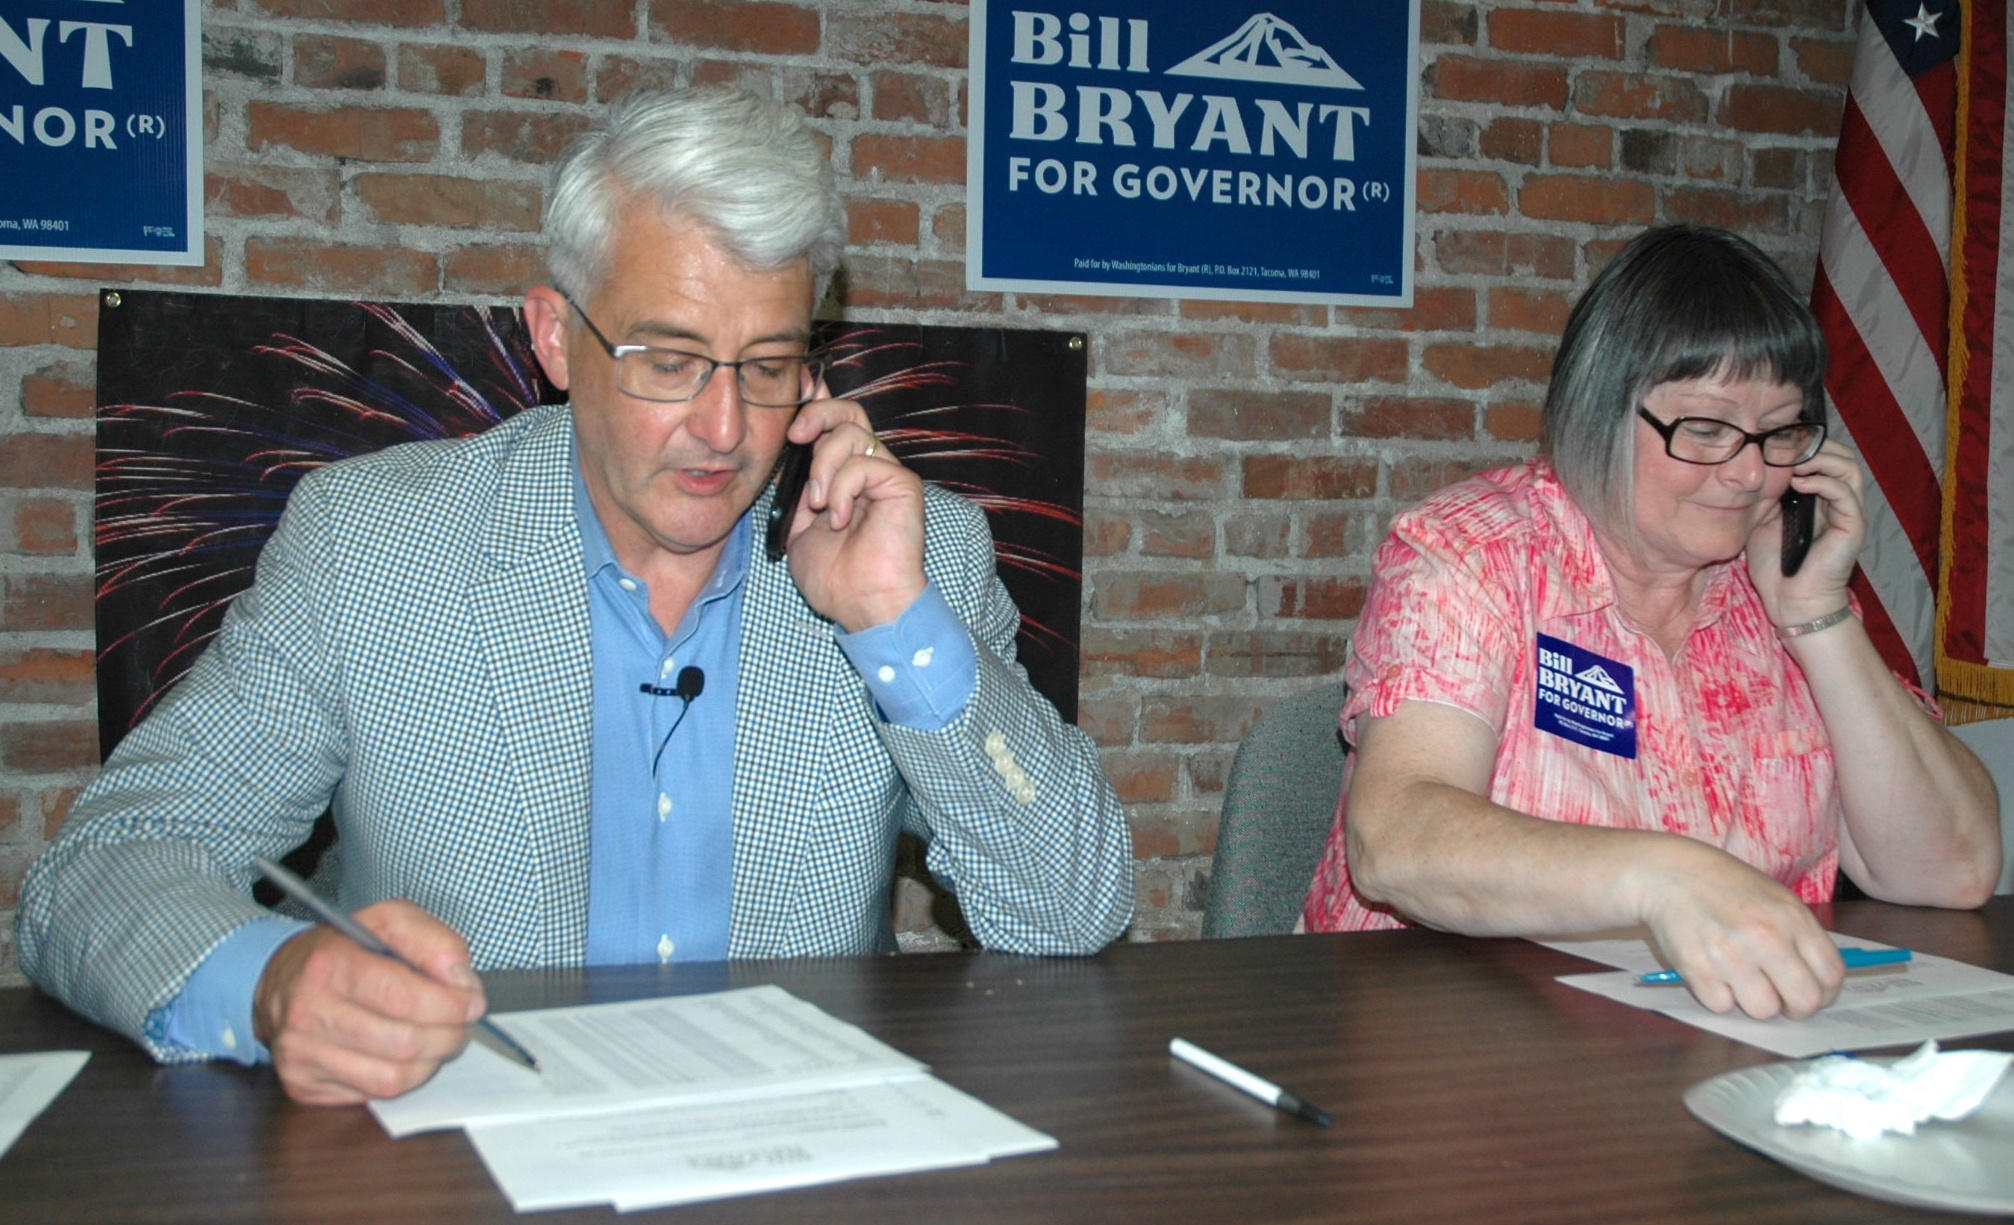 Kirk Boxleitner/Staff PhotoGubernatorial candidate Bill Bryant joins local volunteer Suzanne Campbell in calling voters.